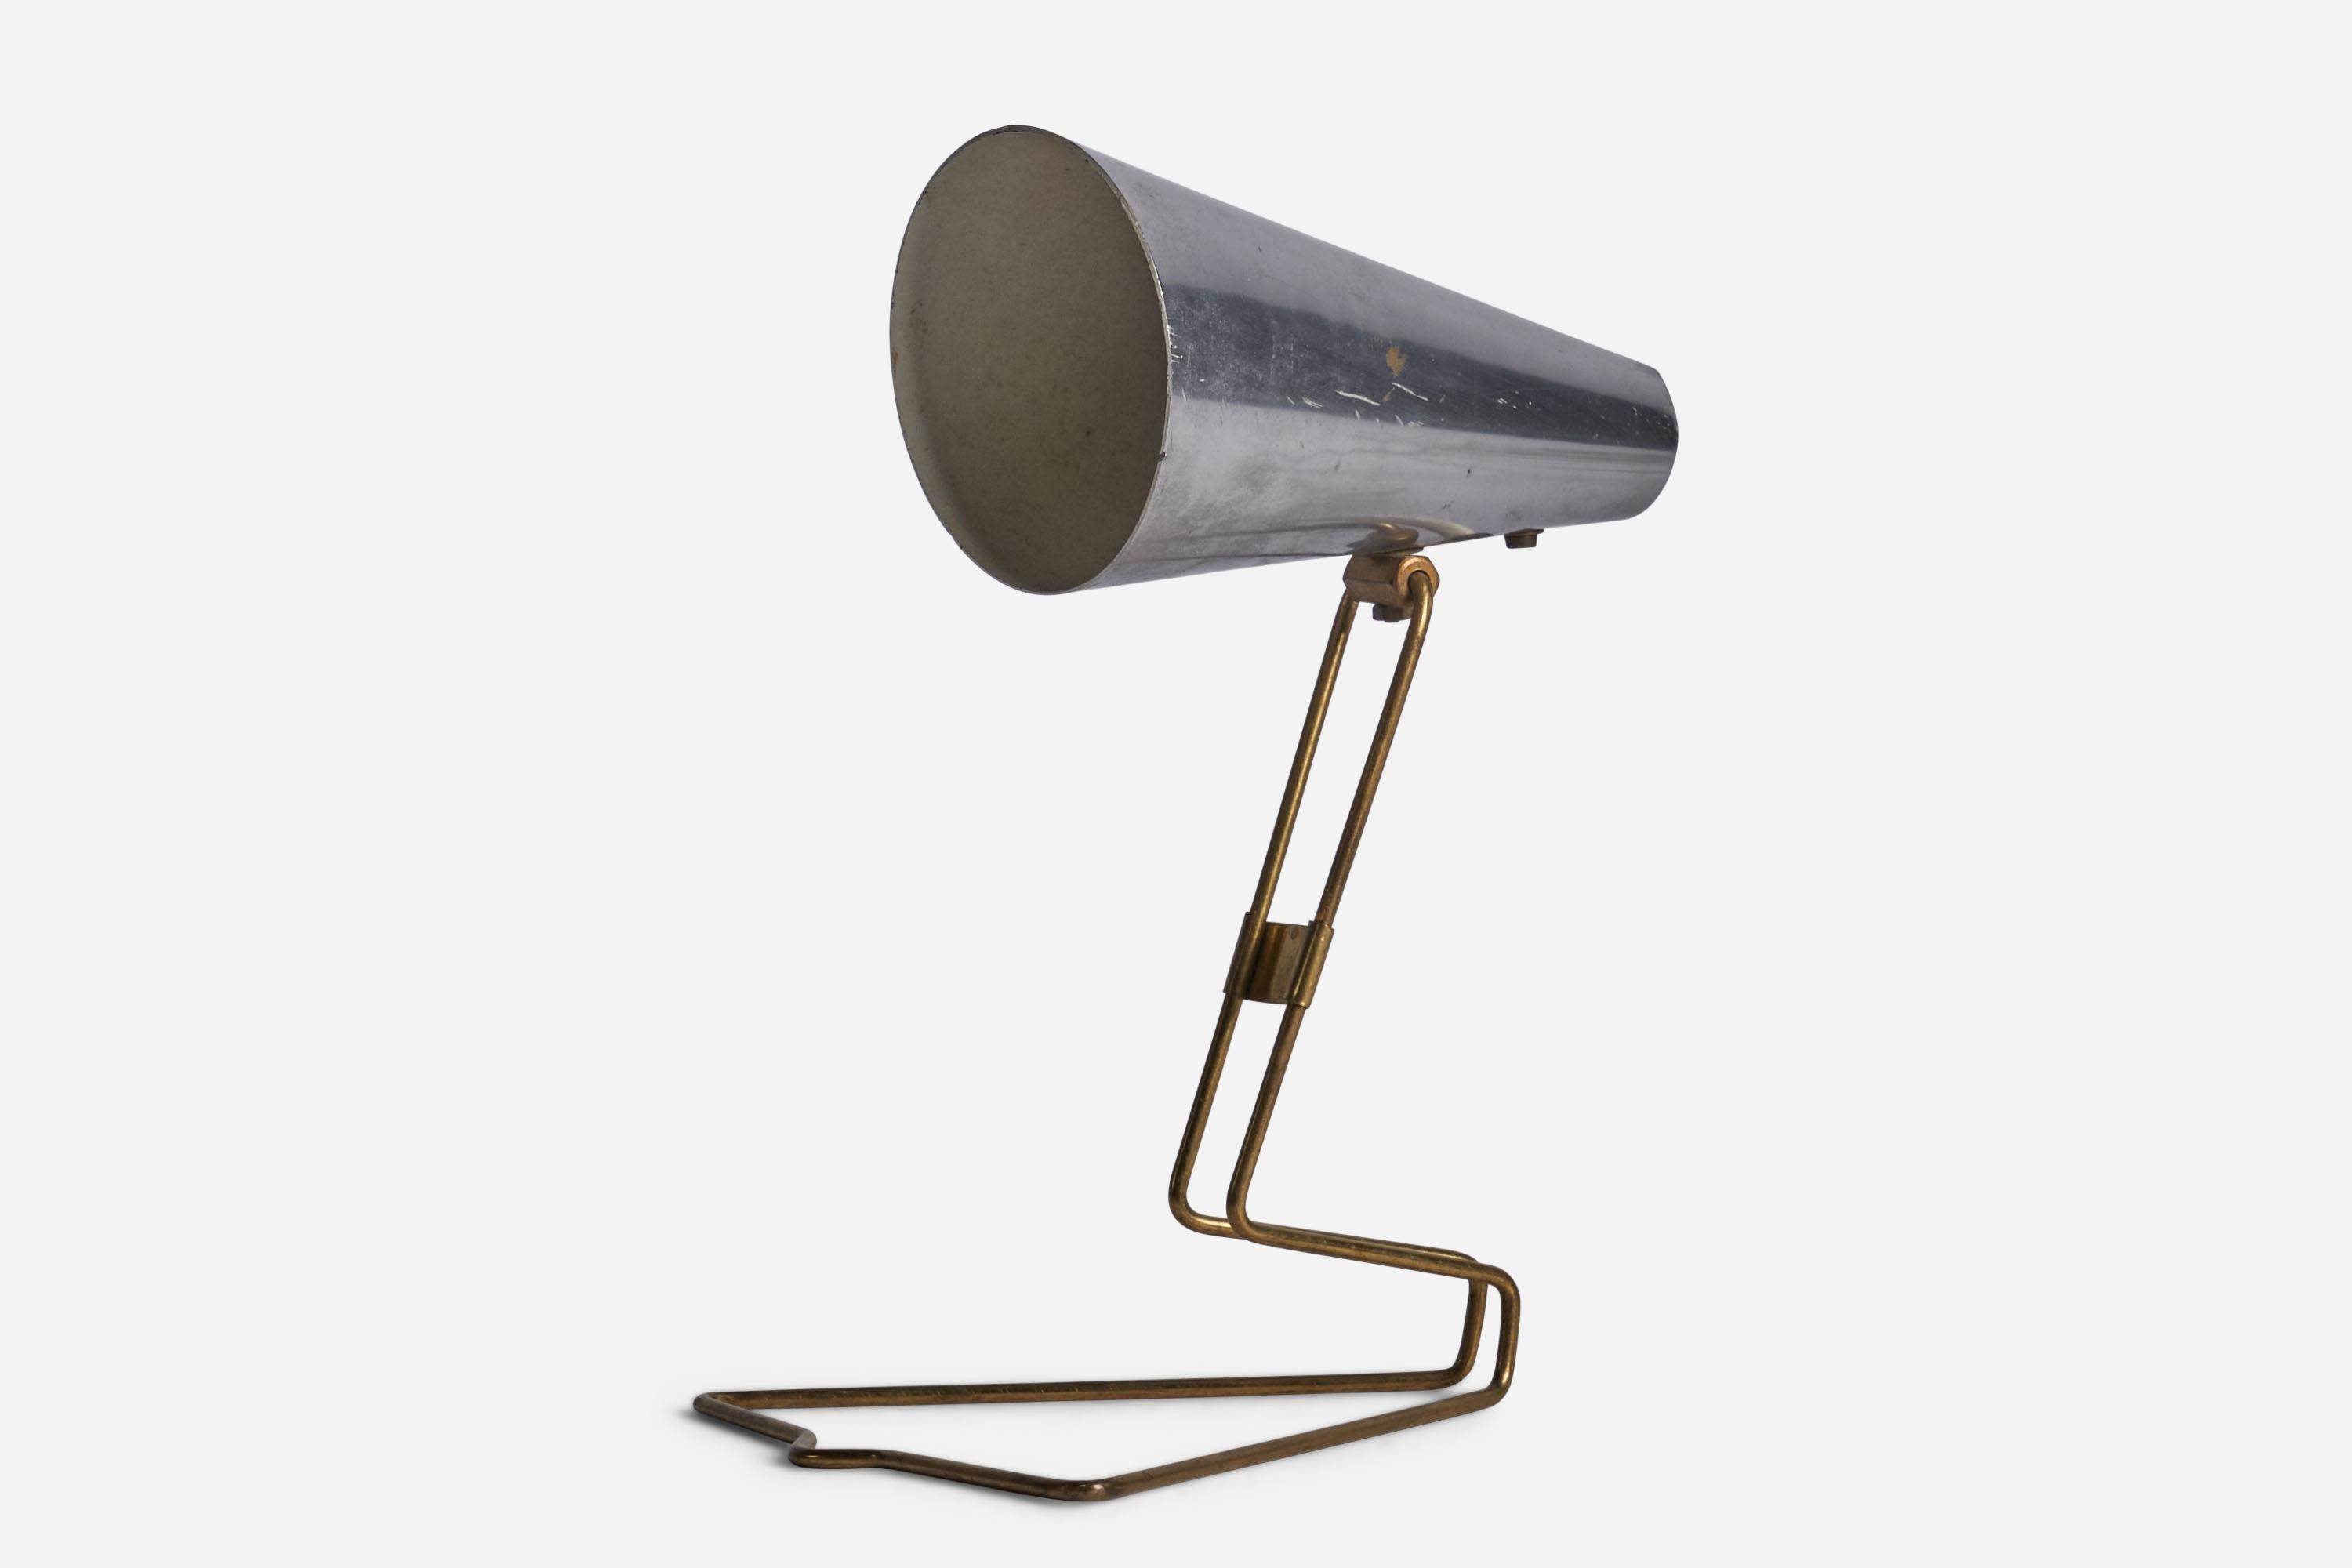 A brass and aluminium table lamp designed and produced by Idman Presenta, Finland, c. 1950s. 

Can be configured as wall light in addition. Please note cord feeds from lampshade.

Overall Dimensions (inches): 8.75” H x 6.5” W x 7.5” D
Bulb